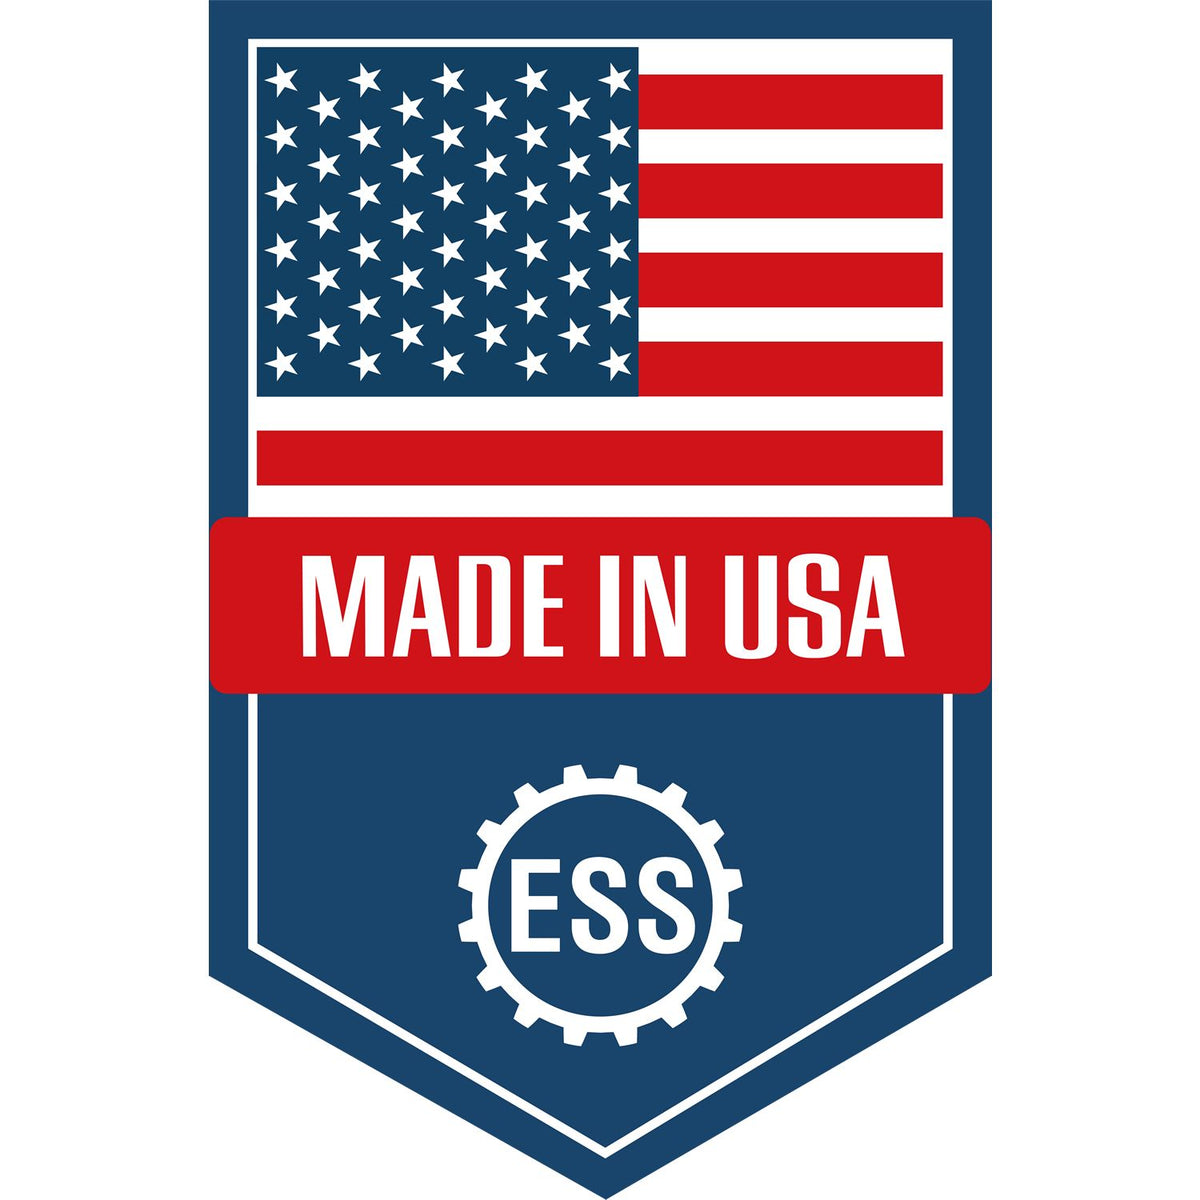 An icon or graphic with an american flag and text reading Made in USA for the Soft North Carolina Professional Engineer Seal